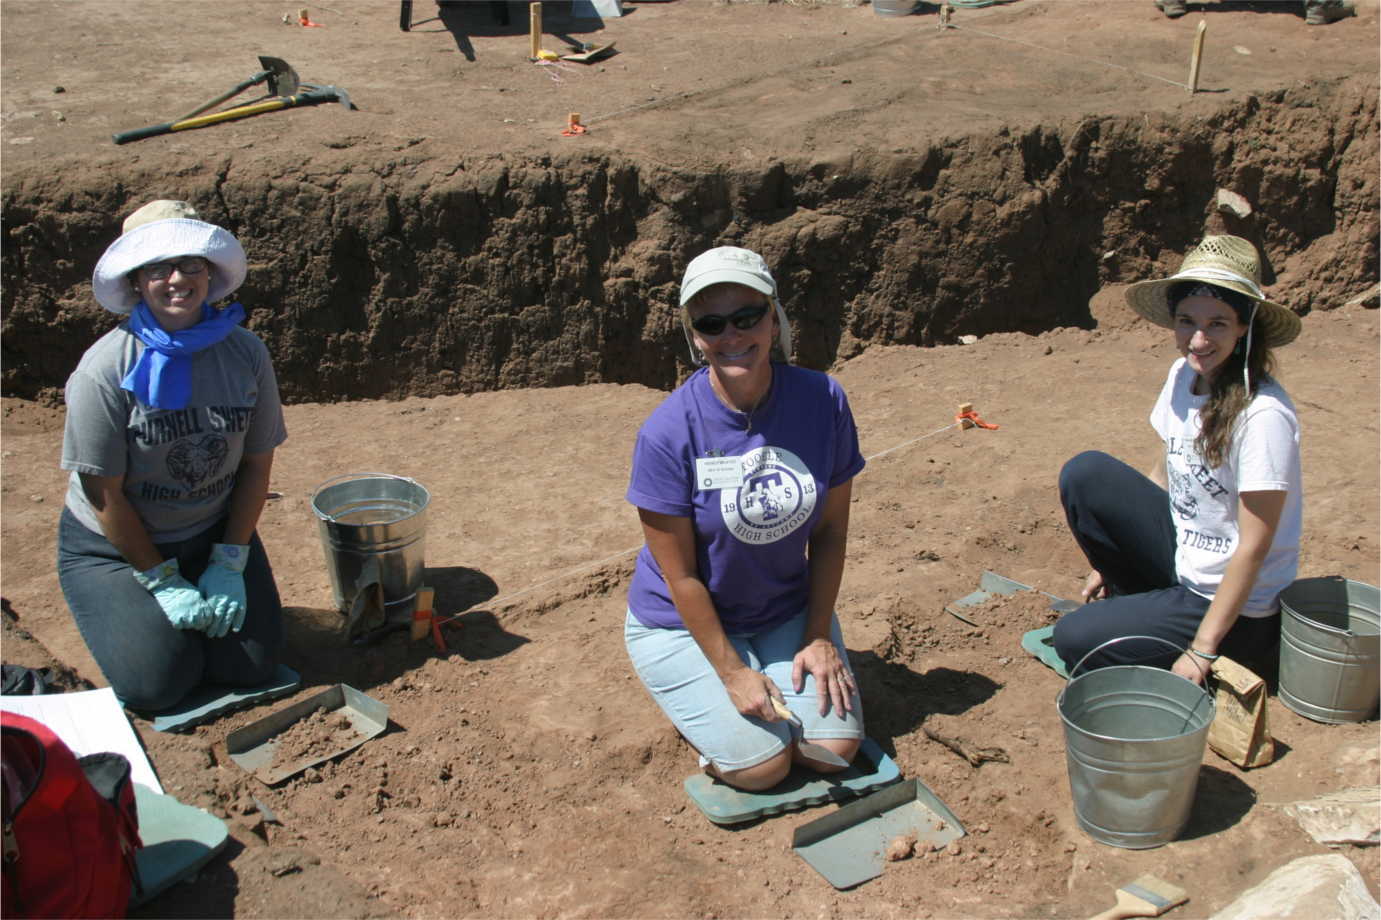 Teachers participate in an archaeological dig. Image courtesy of Crow Canyon Archaeological Center.